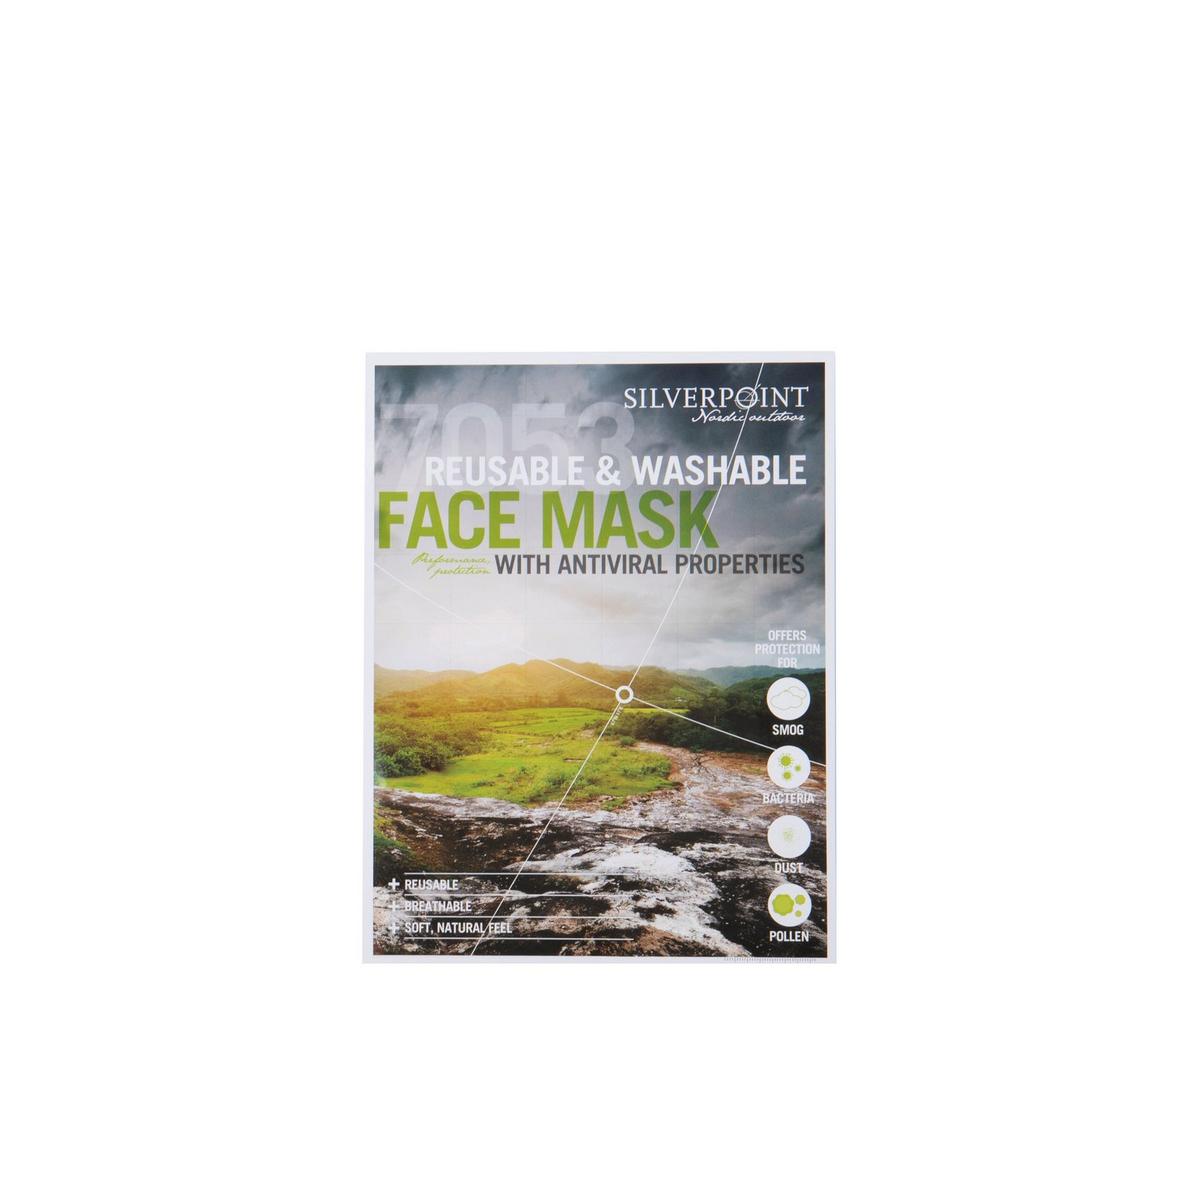 Silverpoint Unisex Silverpoint Antiviral Face Mask - Blue